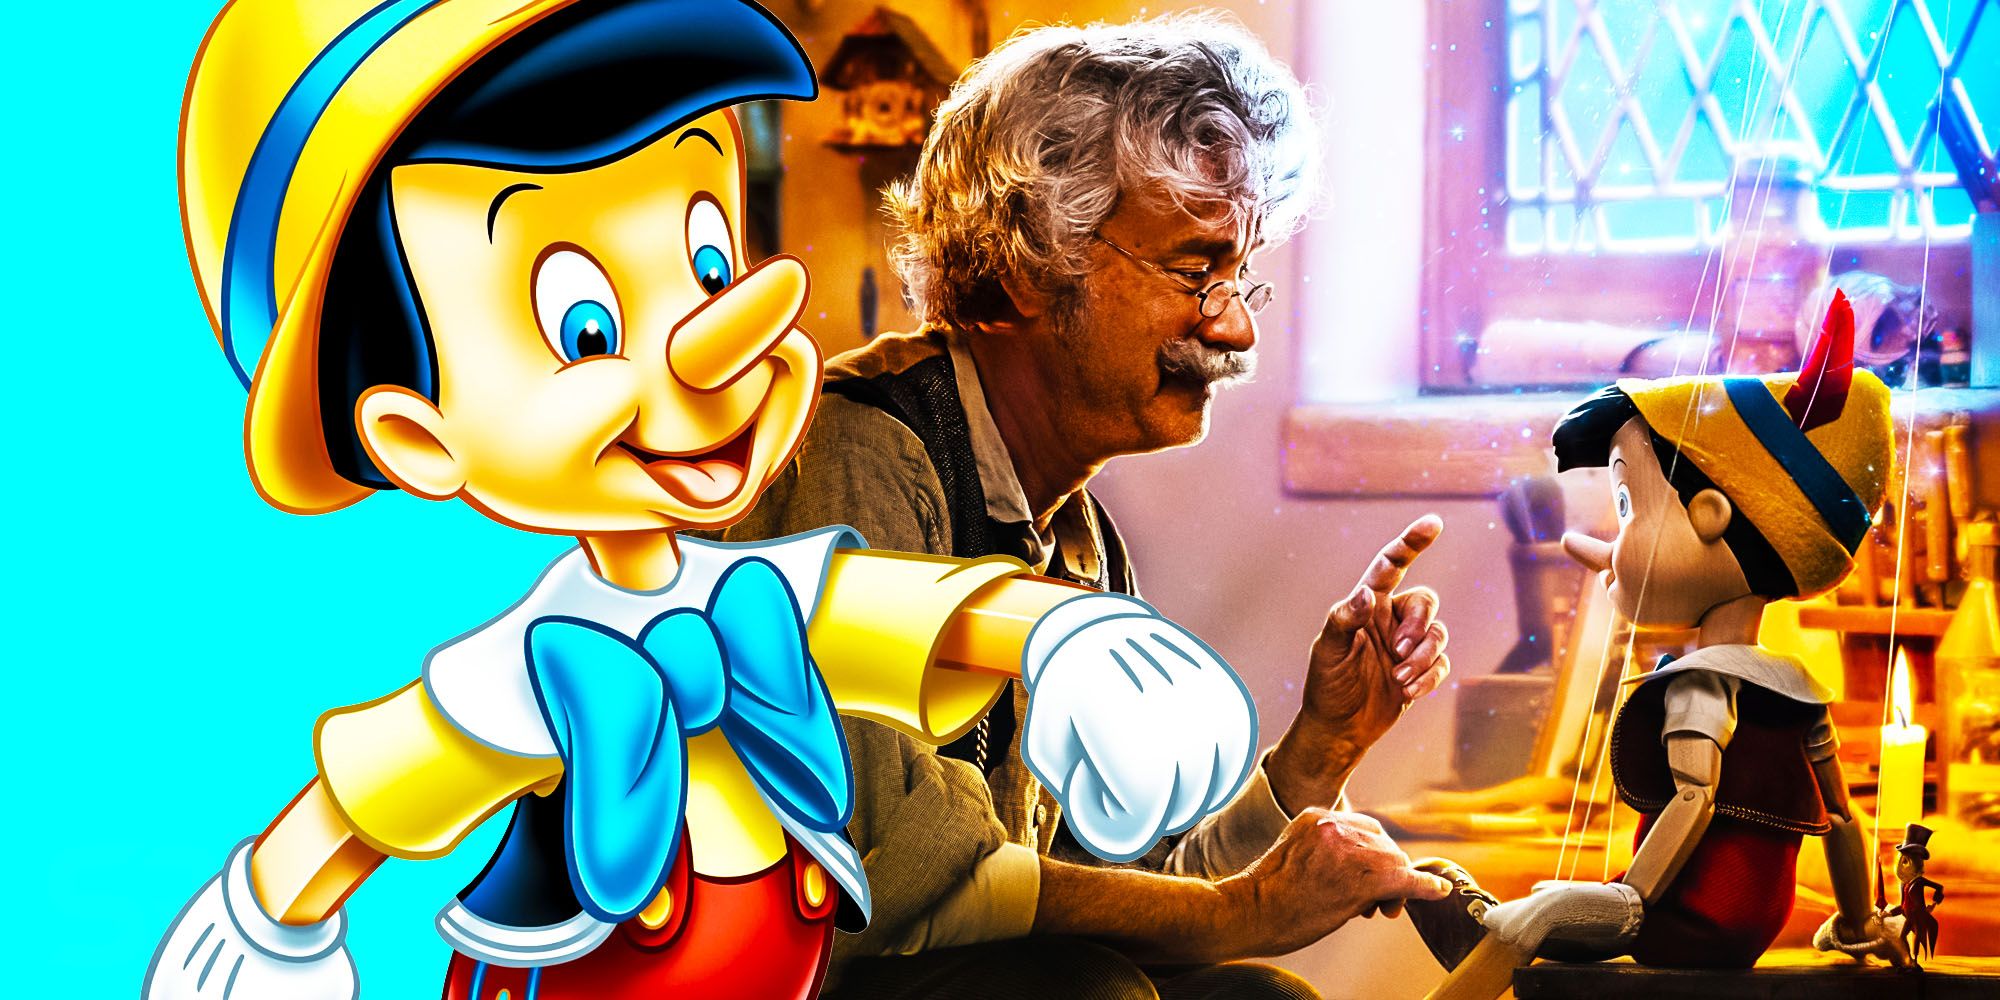 disney Pinnochio animated Geppetto live action